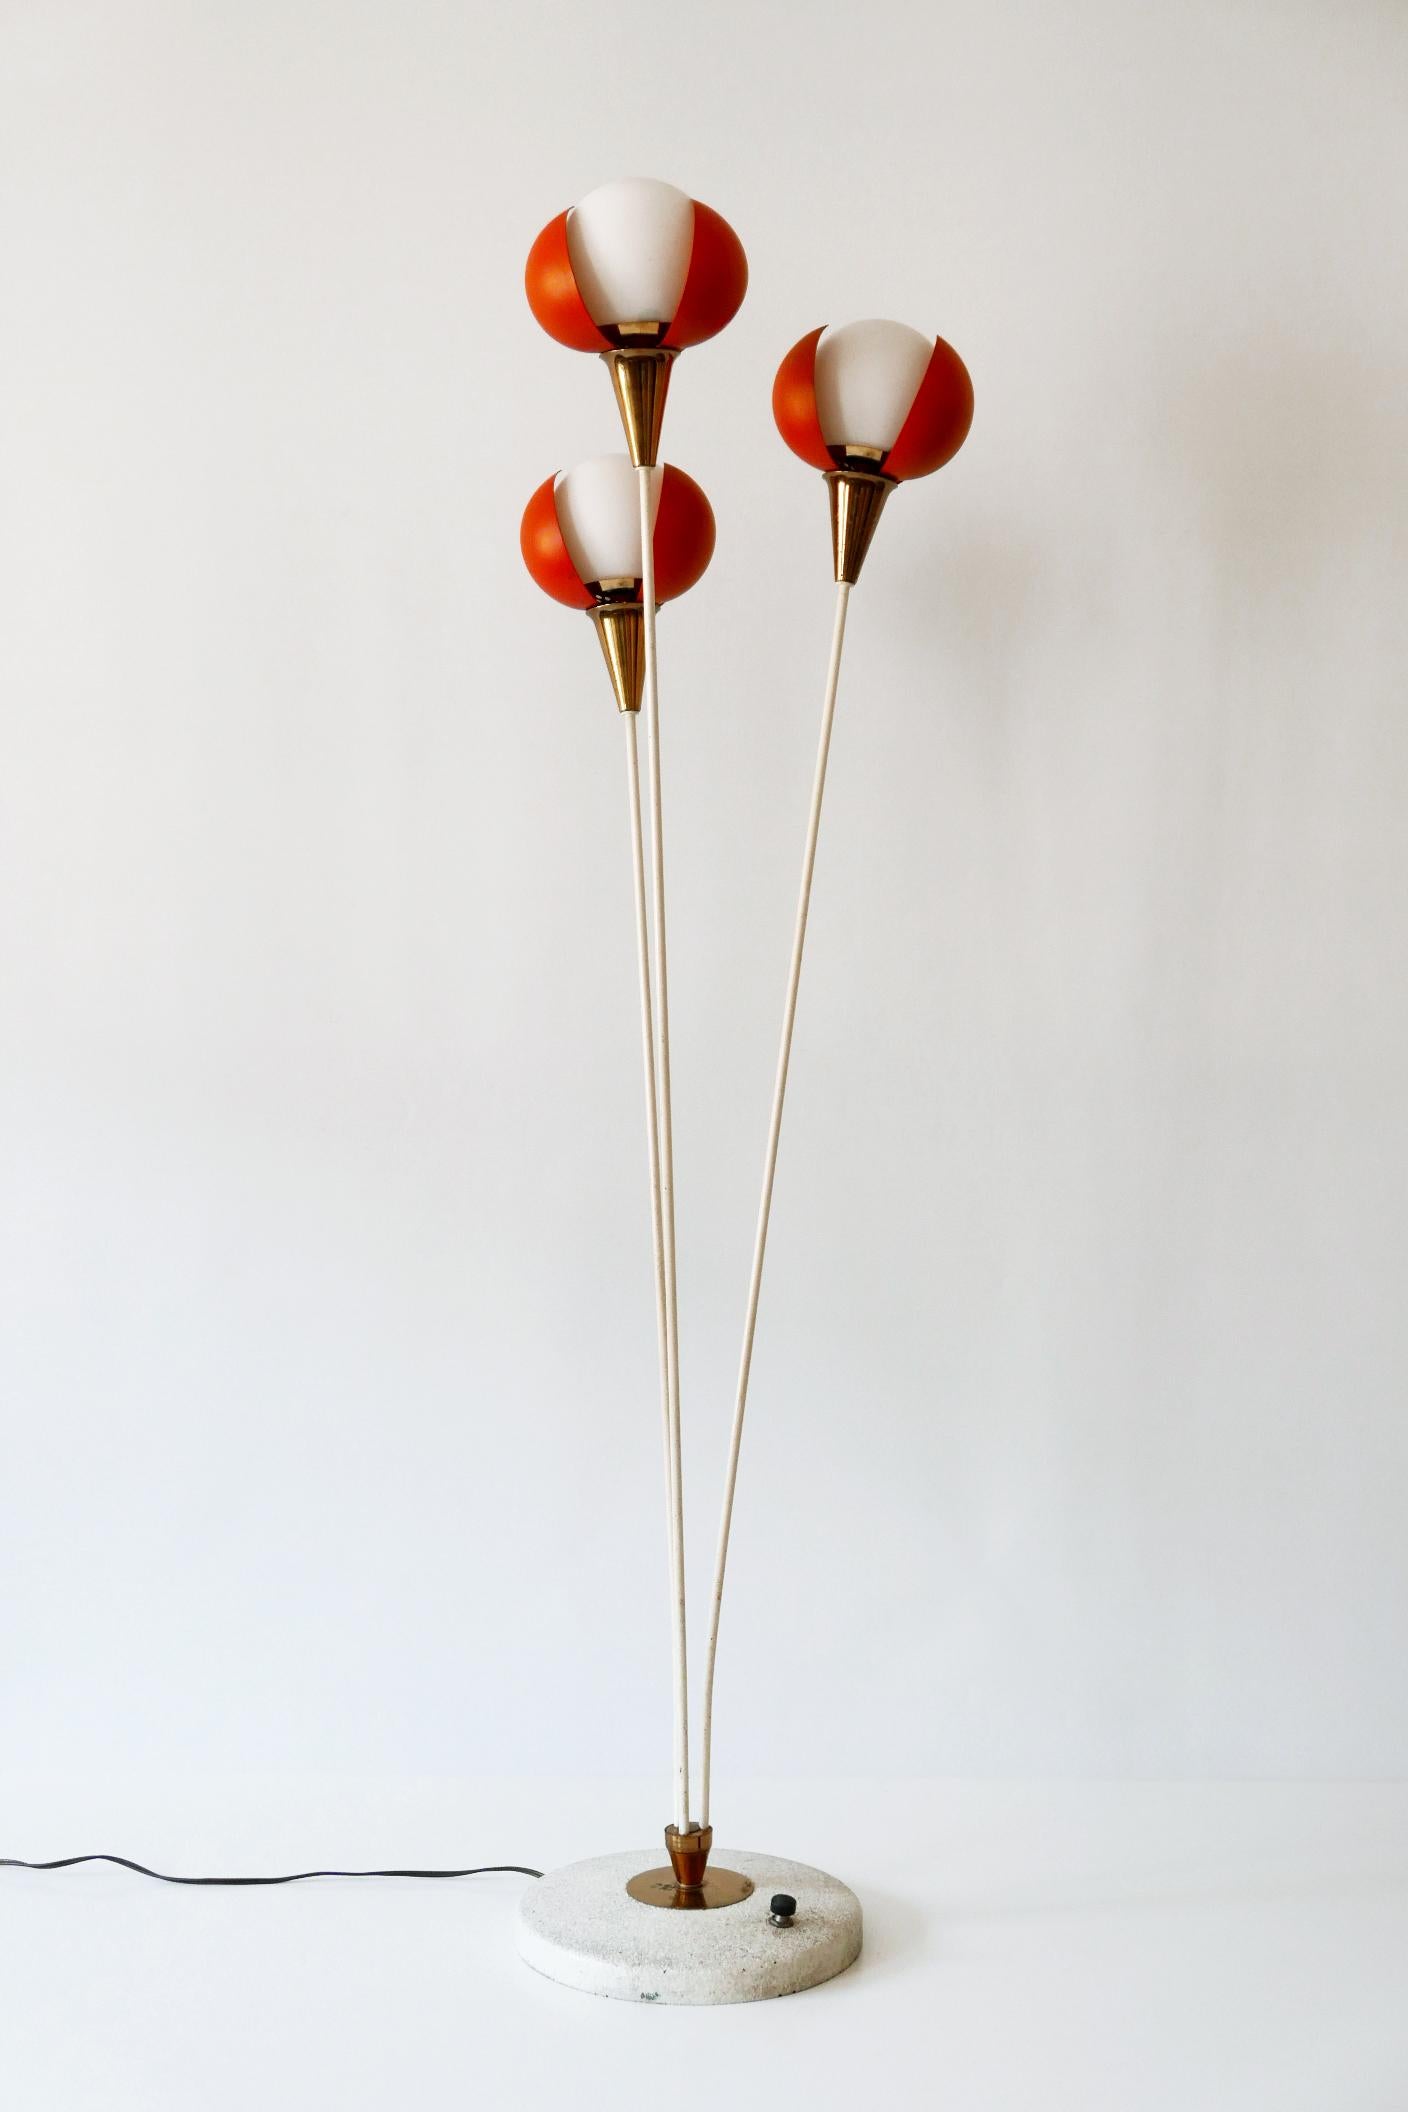 Amazing Mid-Century Modern Three-Flamed Floor Lamp Buds, 1950s, France For Sale 7